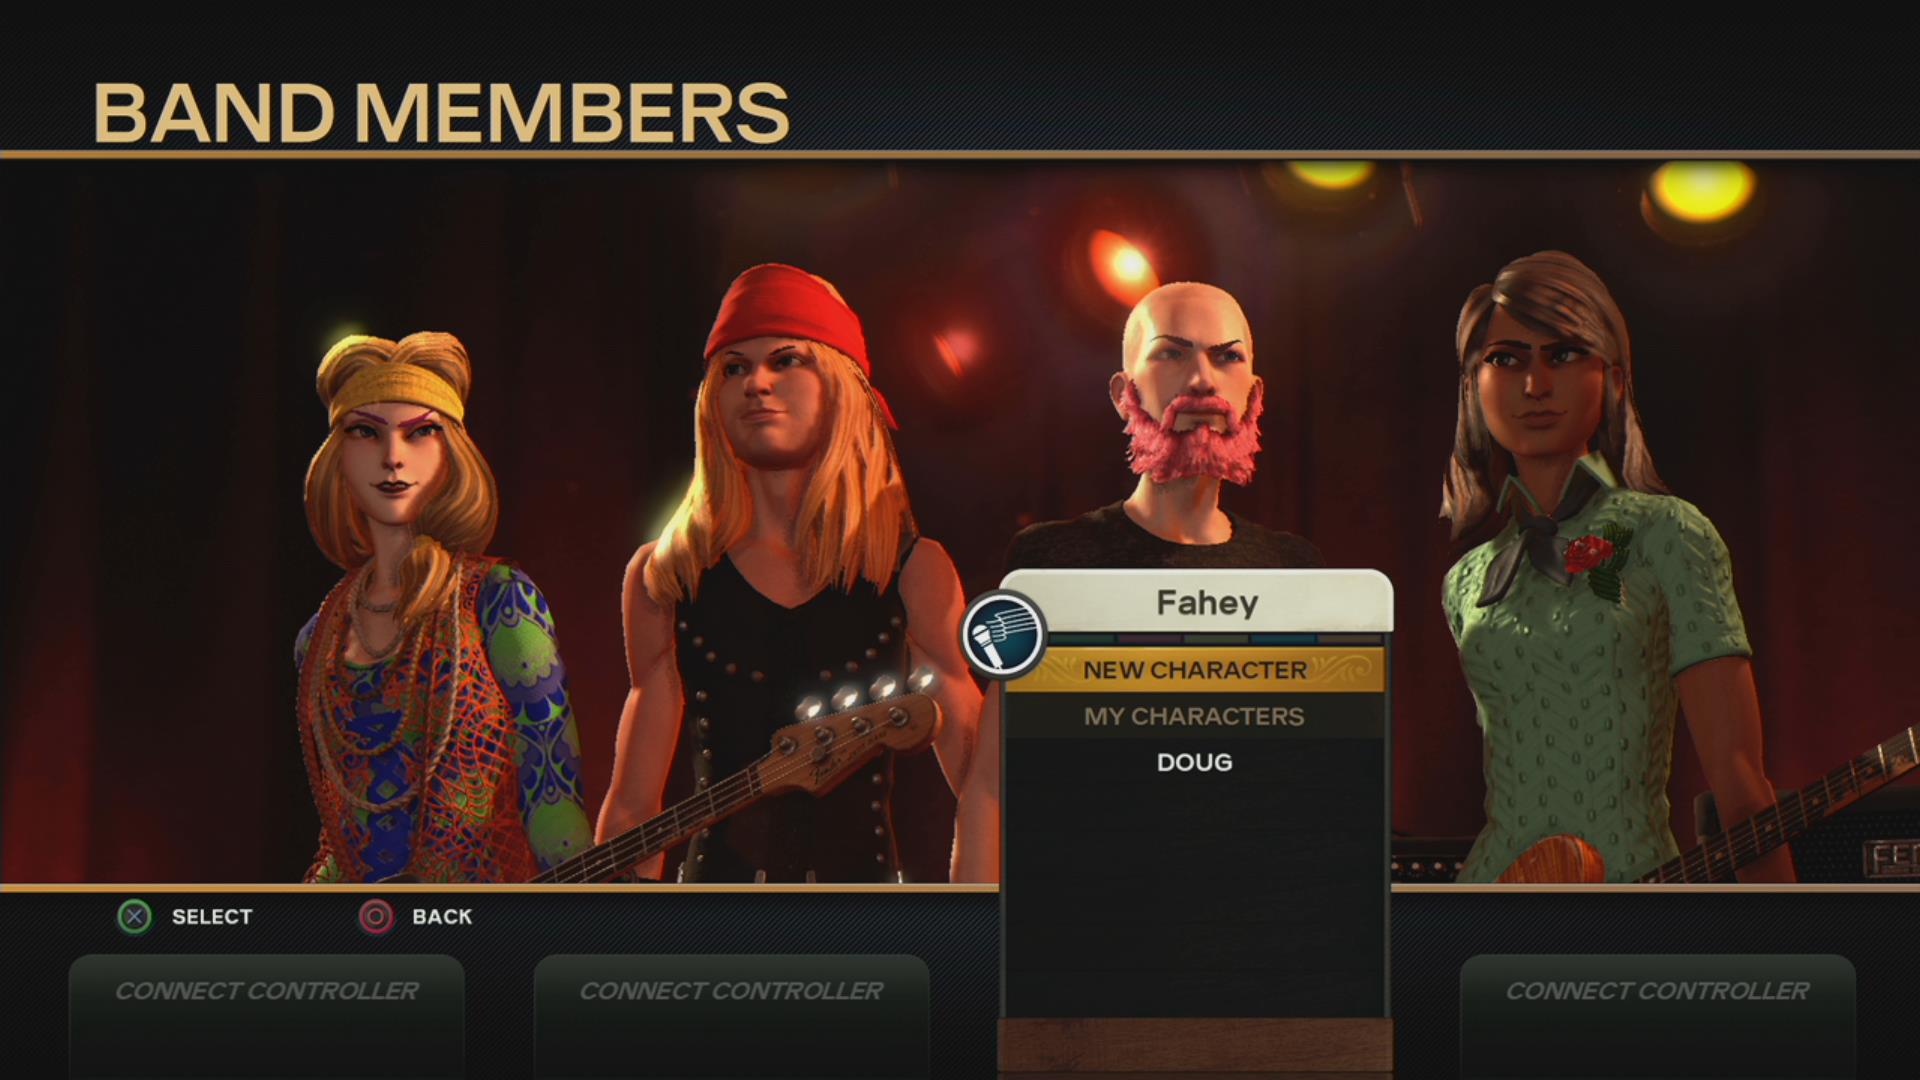 Rock Band 4 Is Pretty Great So Far. My Singing, Not So Much